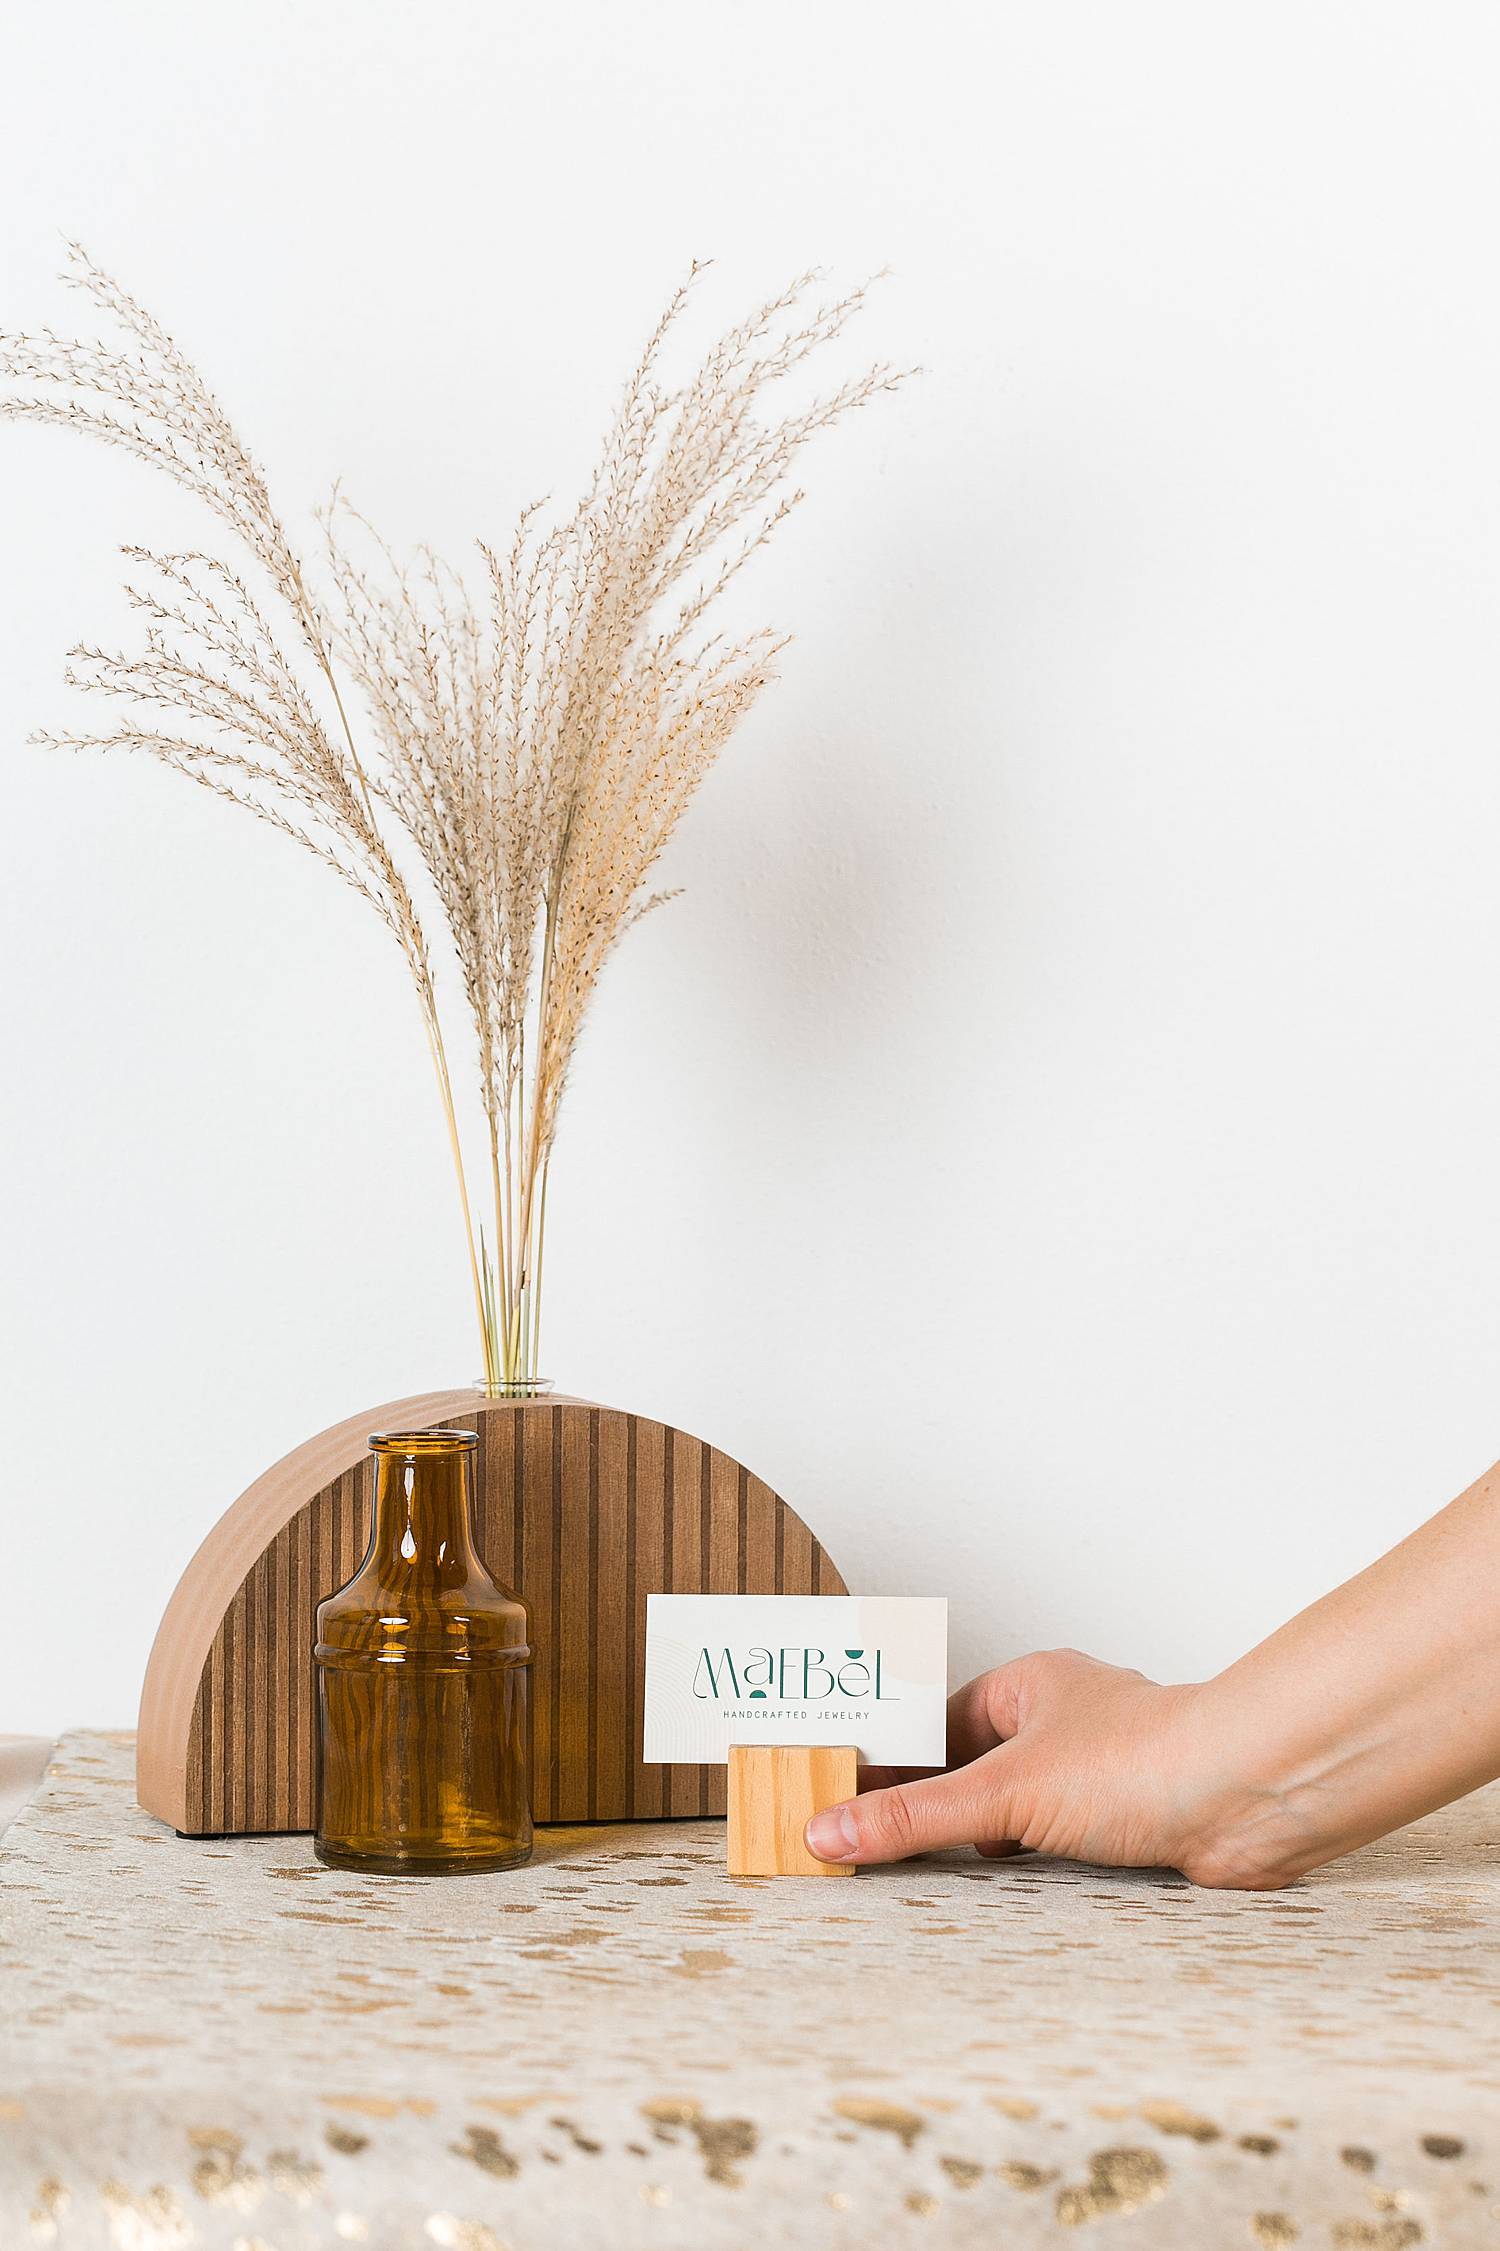 woman's hand holding business card in front of wooden vase and dried decorative grasses